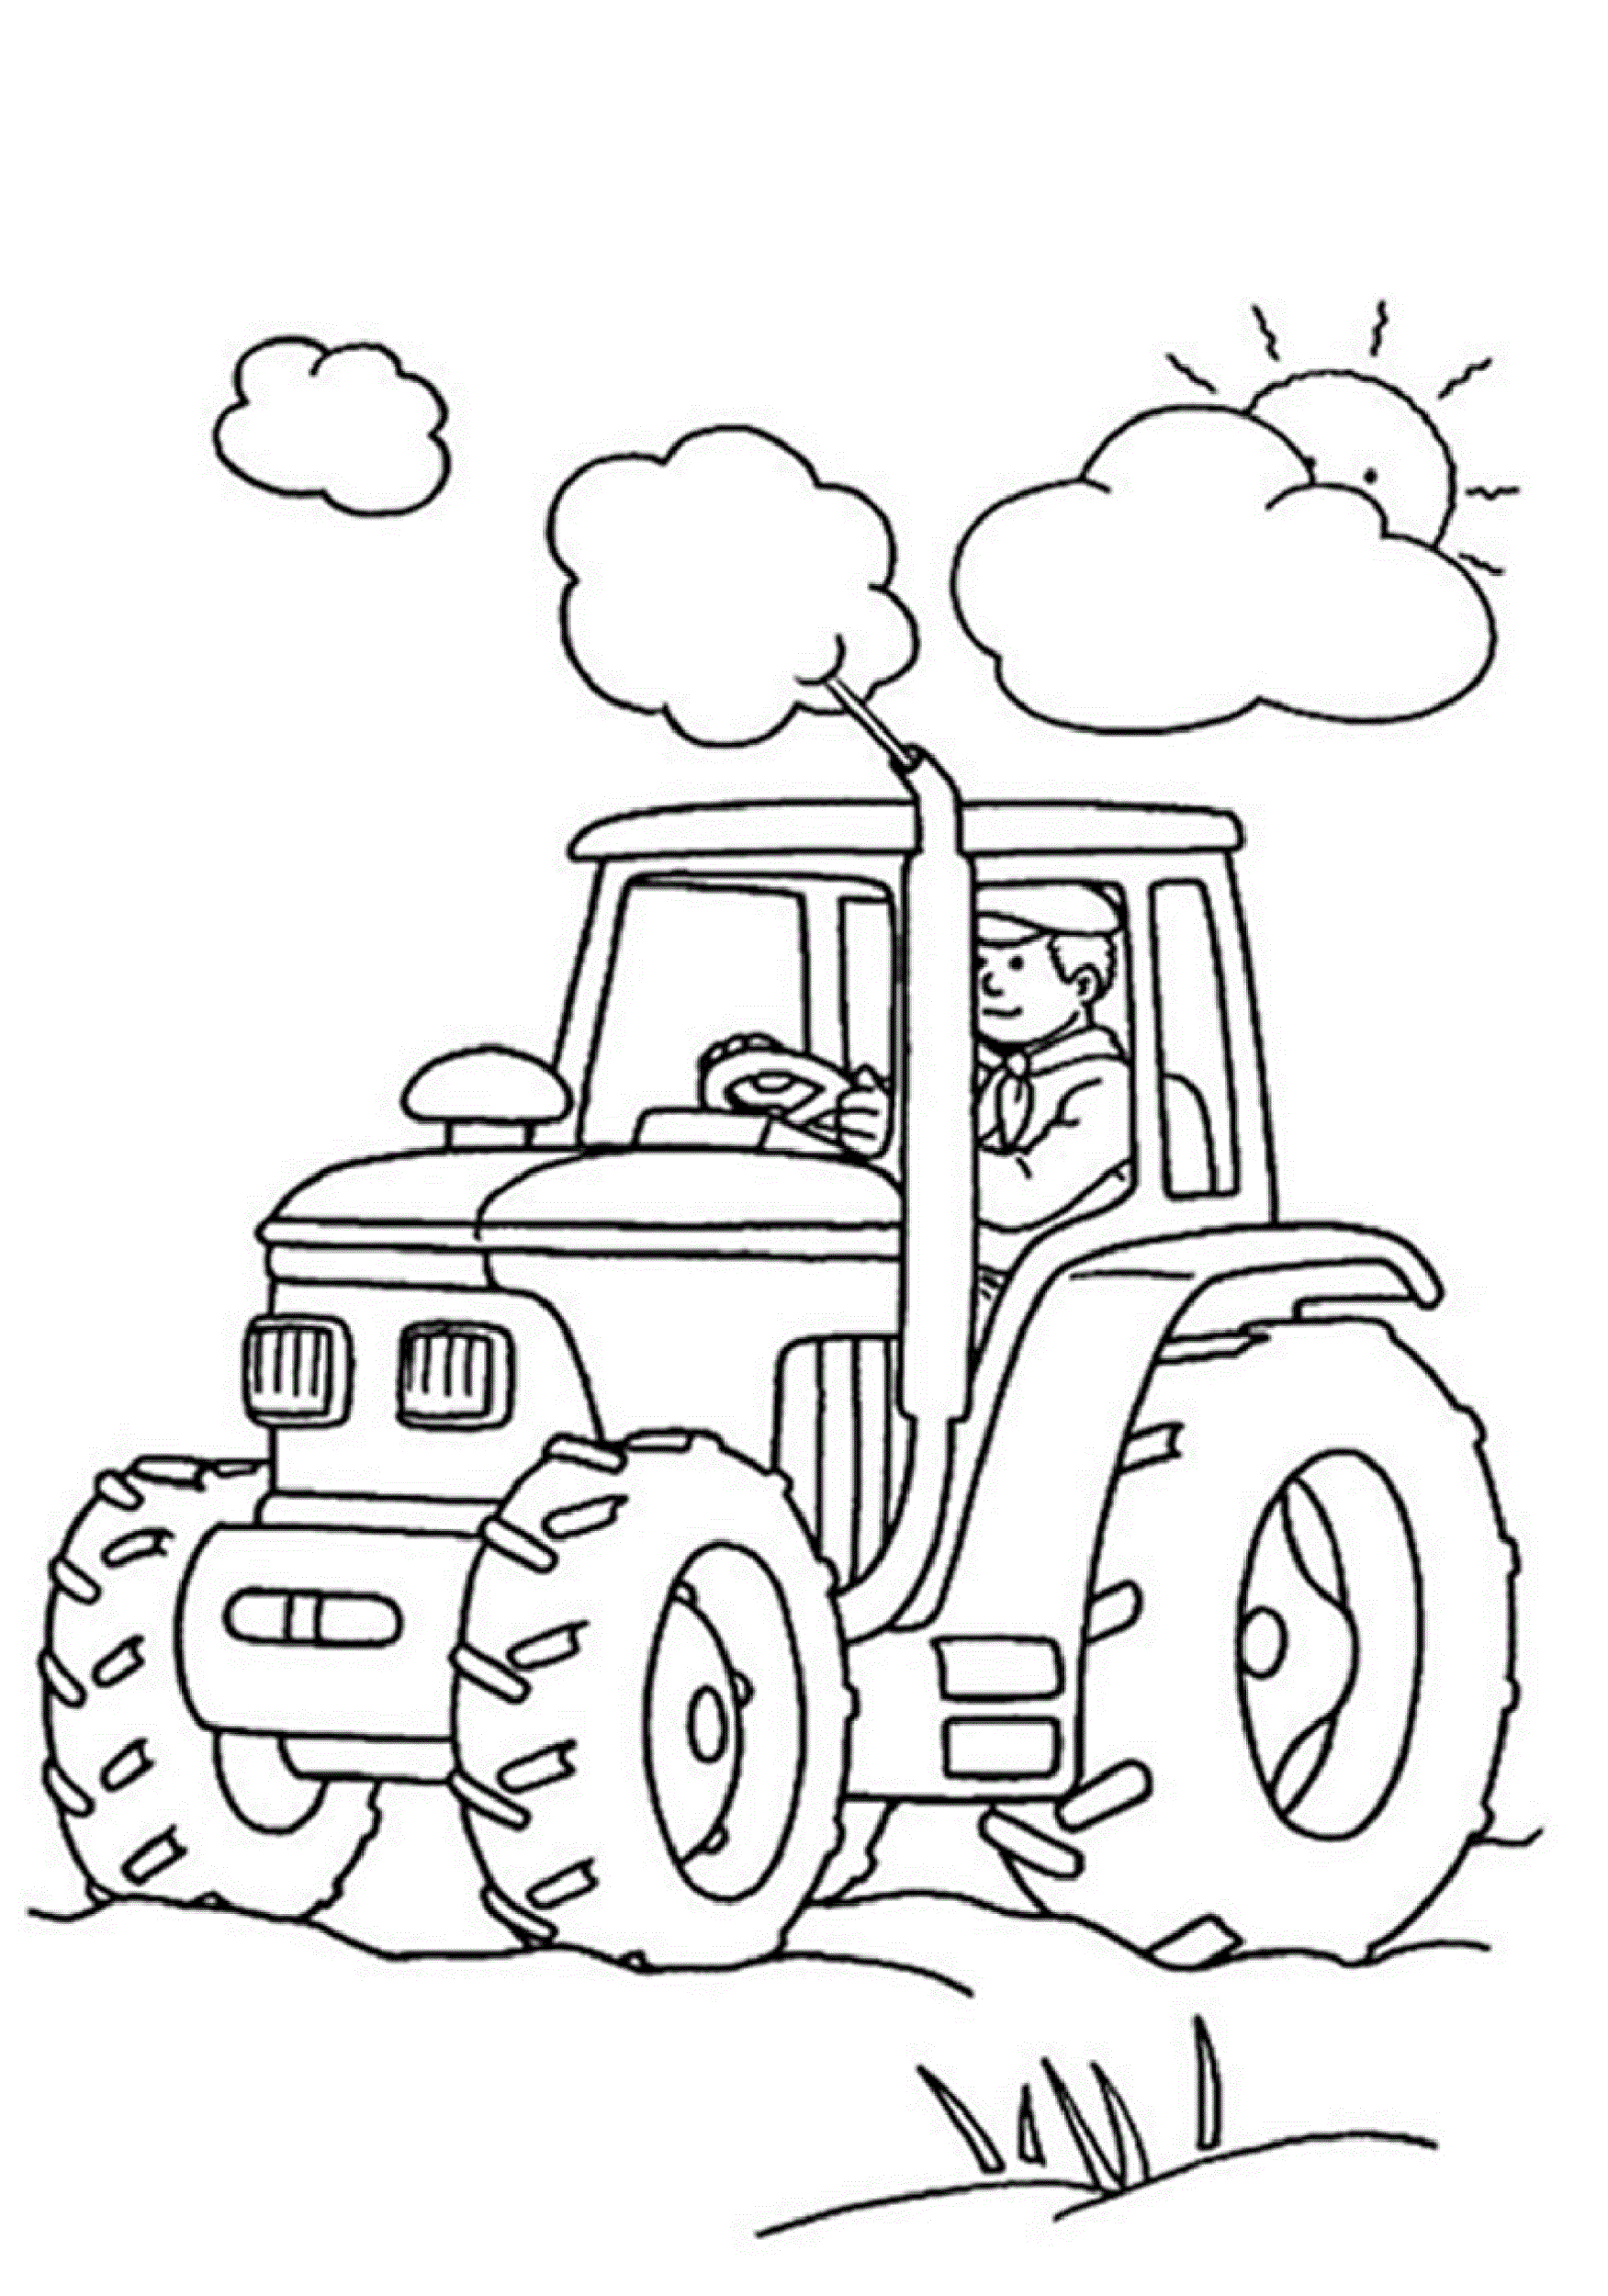 Online Coloring Book for Boys